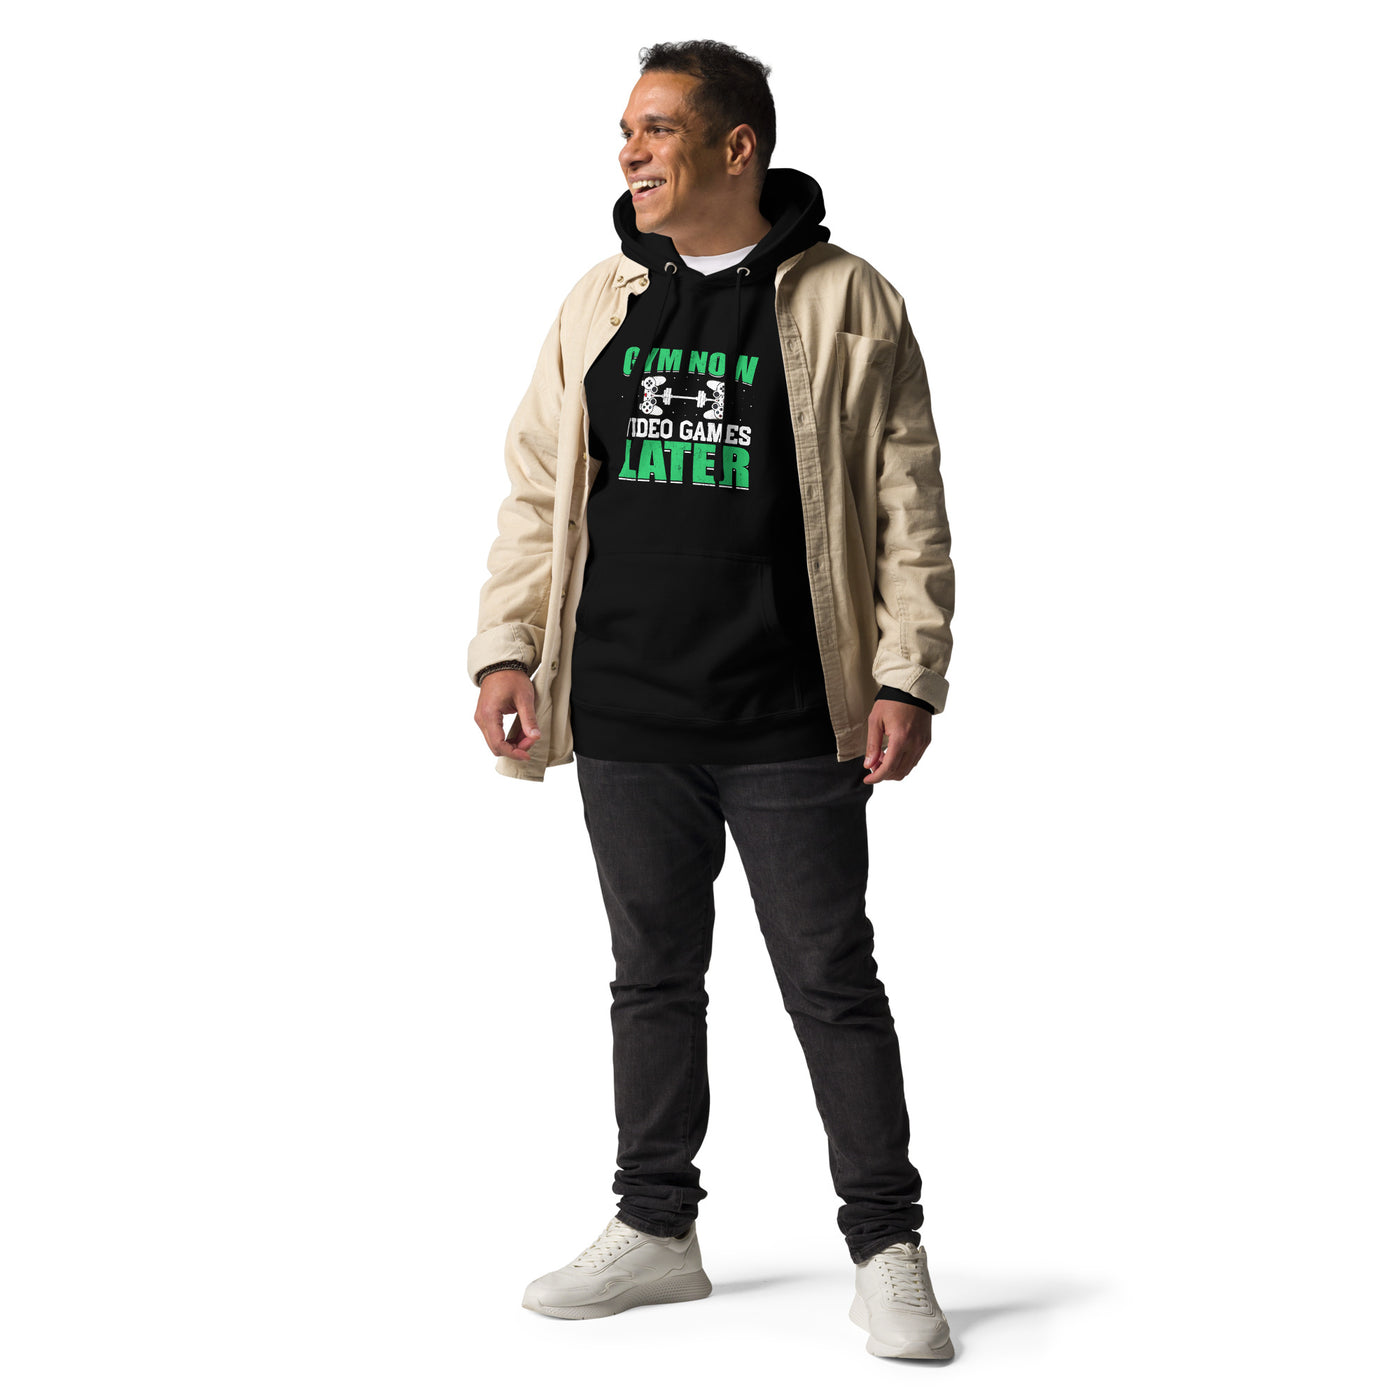 Gym now, Video Games Later - Unisex Hoodie